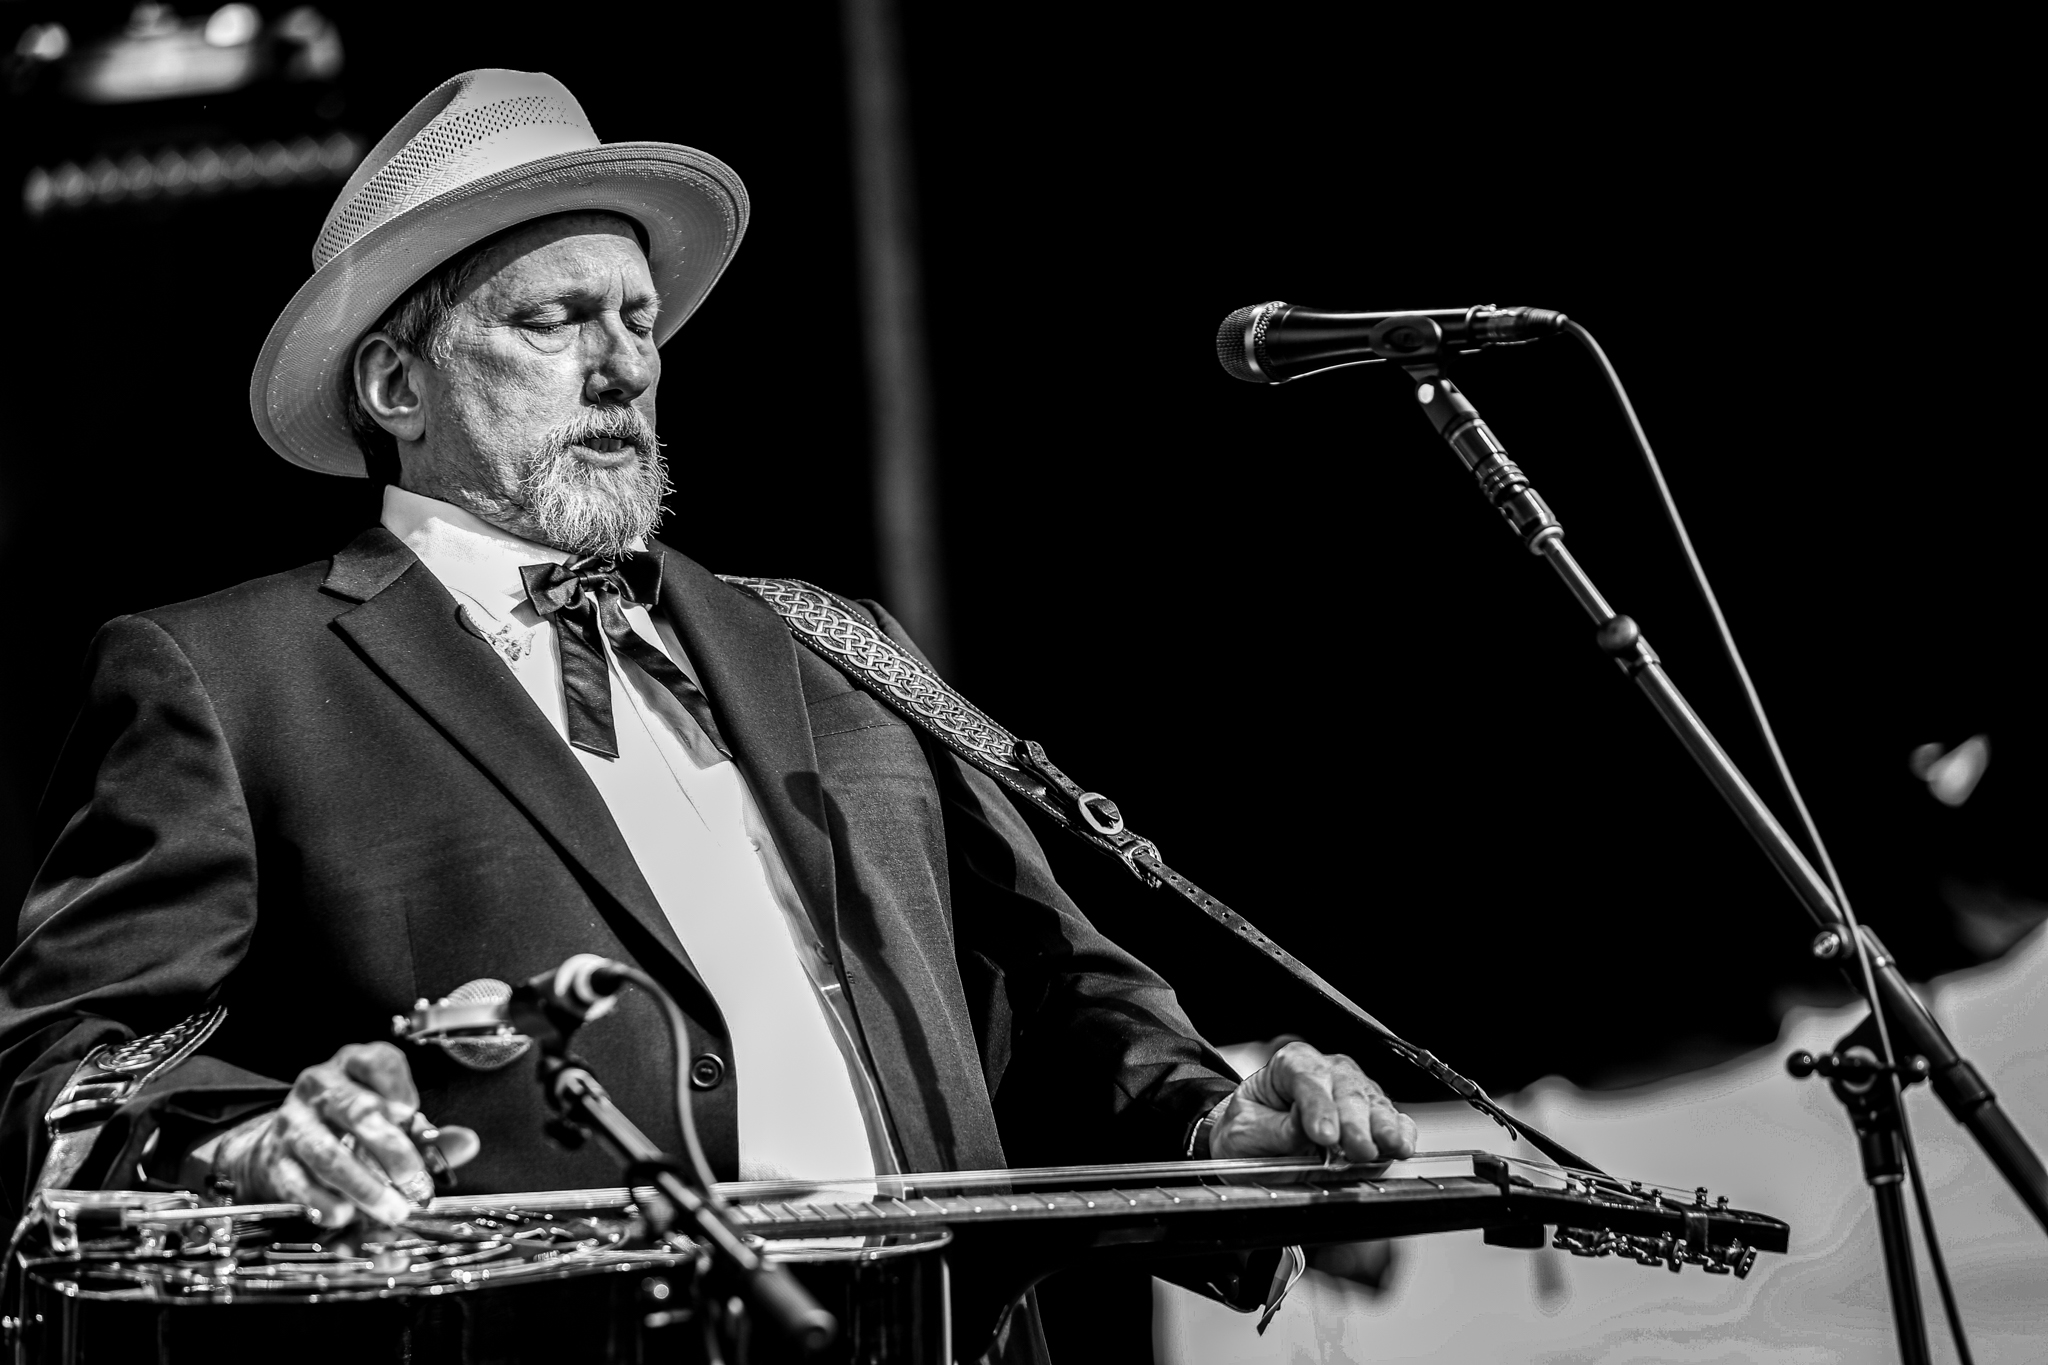 Jerry Douglas hosts Earl Scruggs Festival at Tryon Equestrian Center